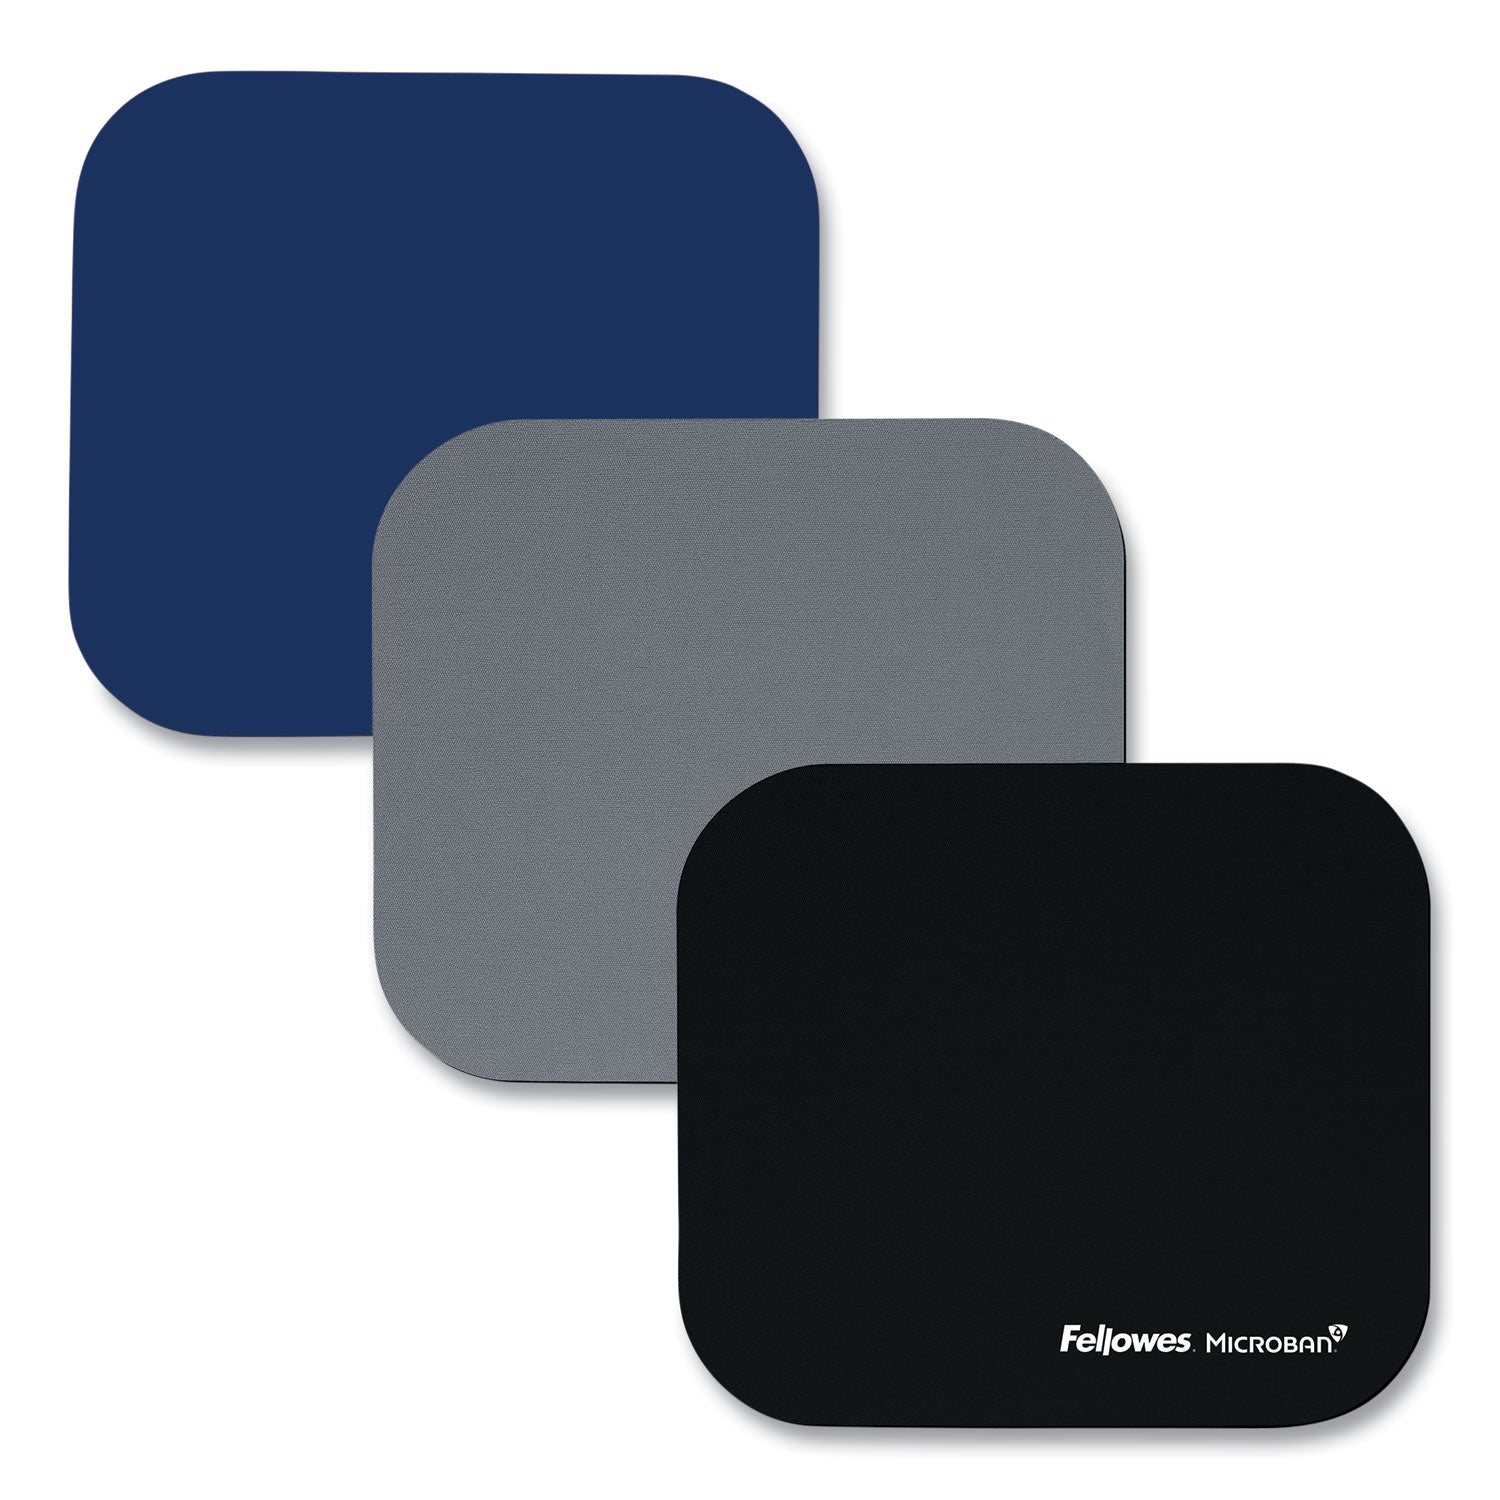 Mouse Pad with Microban Protection, 9 x 8, Navy - 